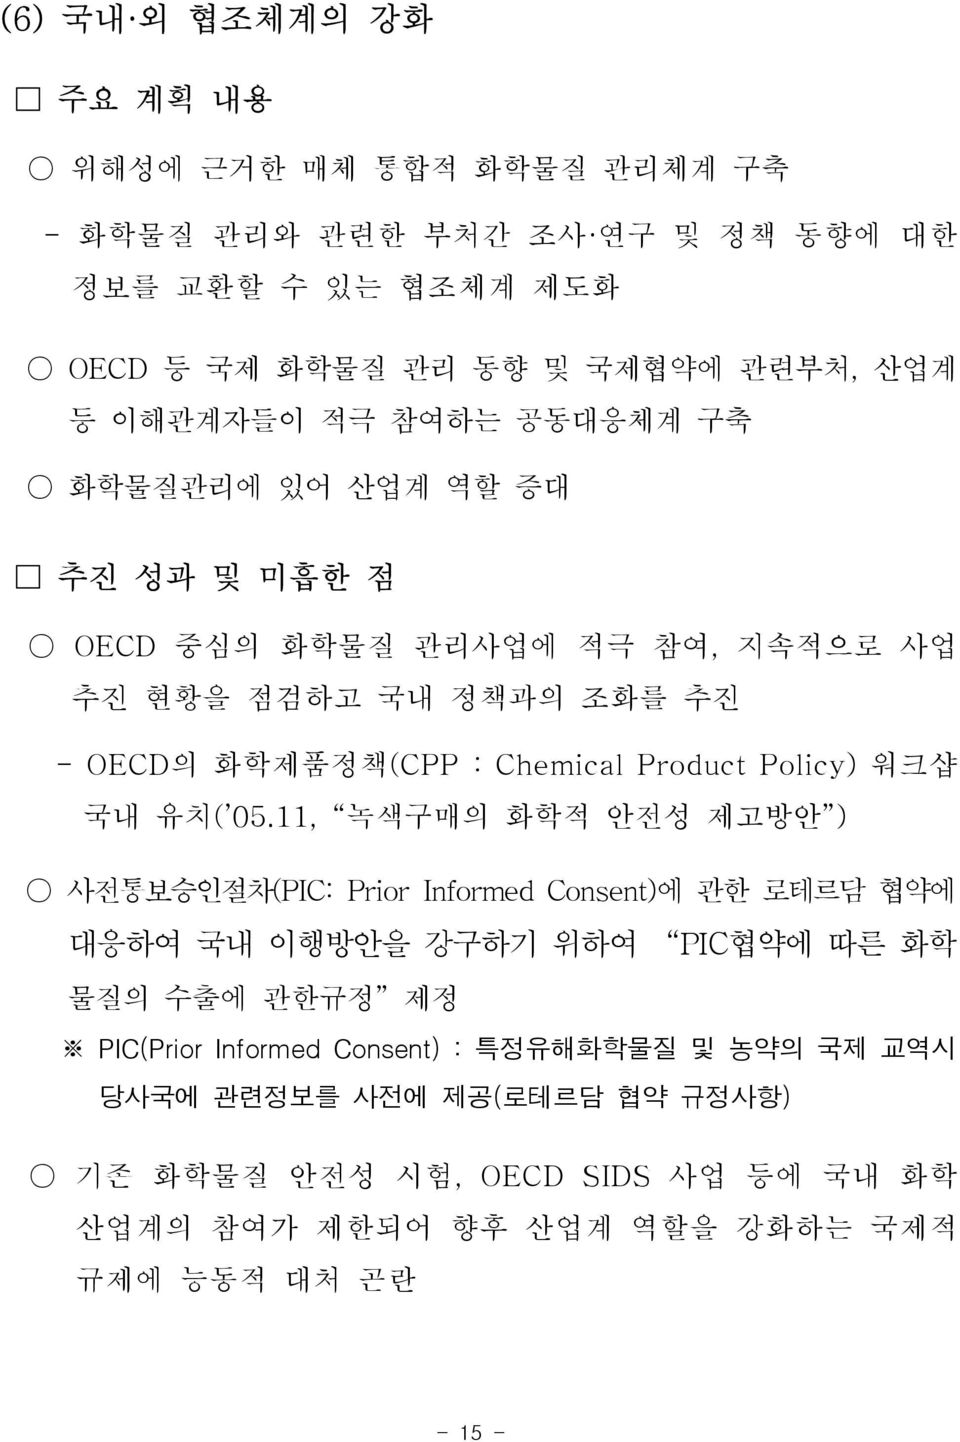 Product Policy) 워크샵 국내 유치( 05.